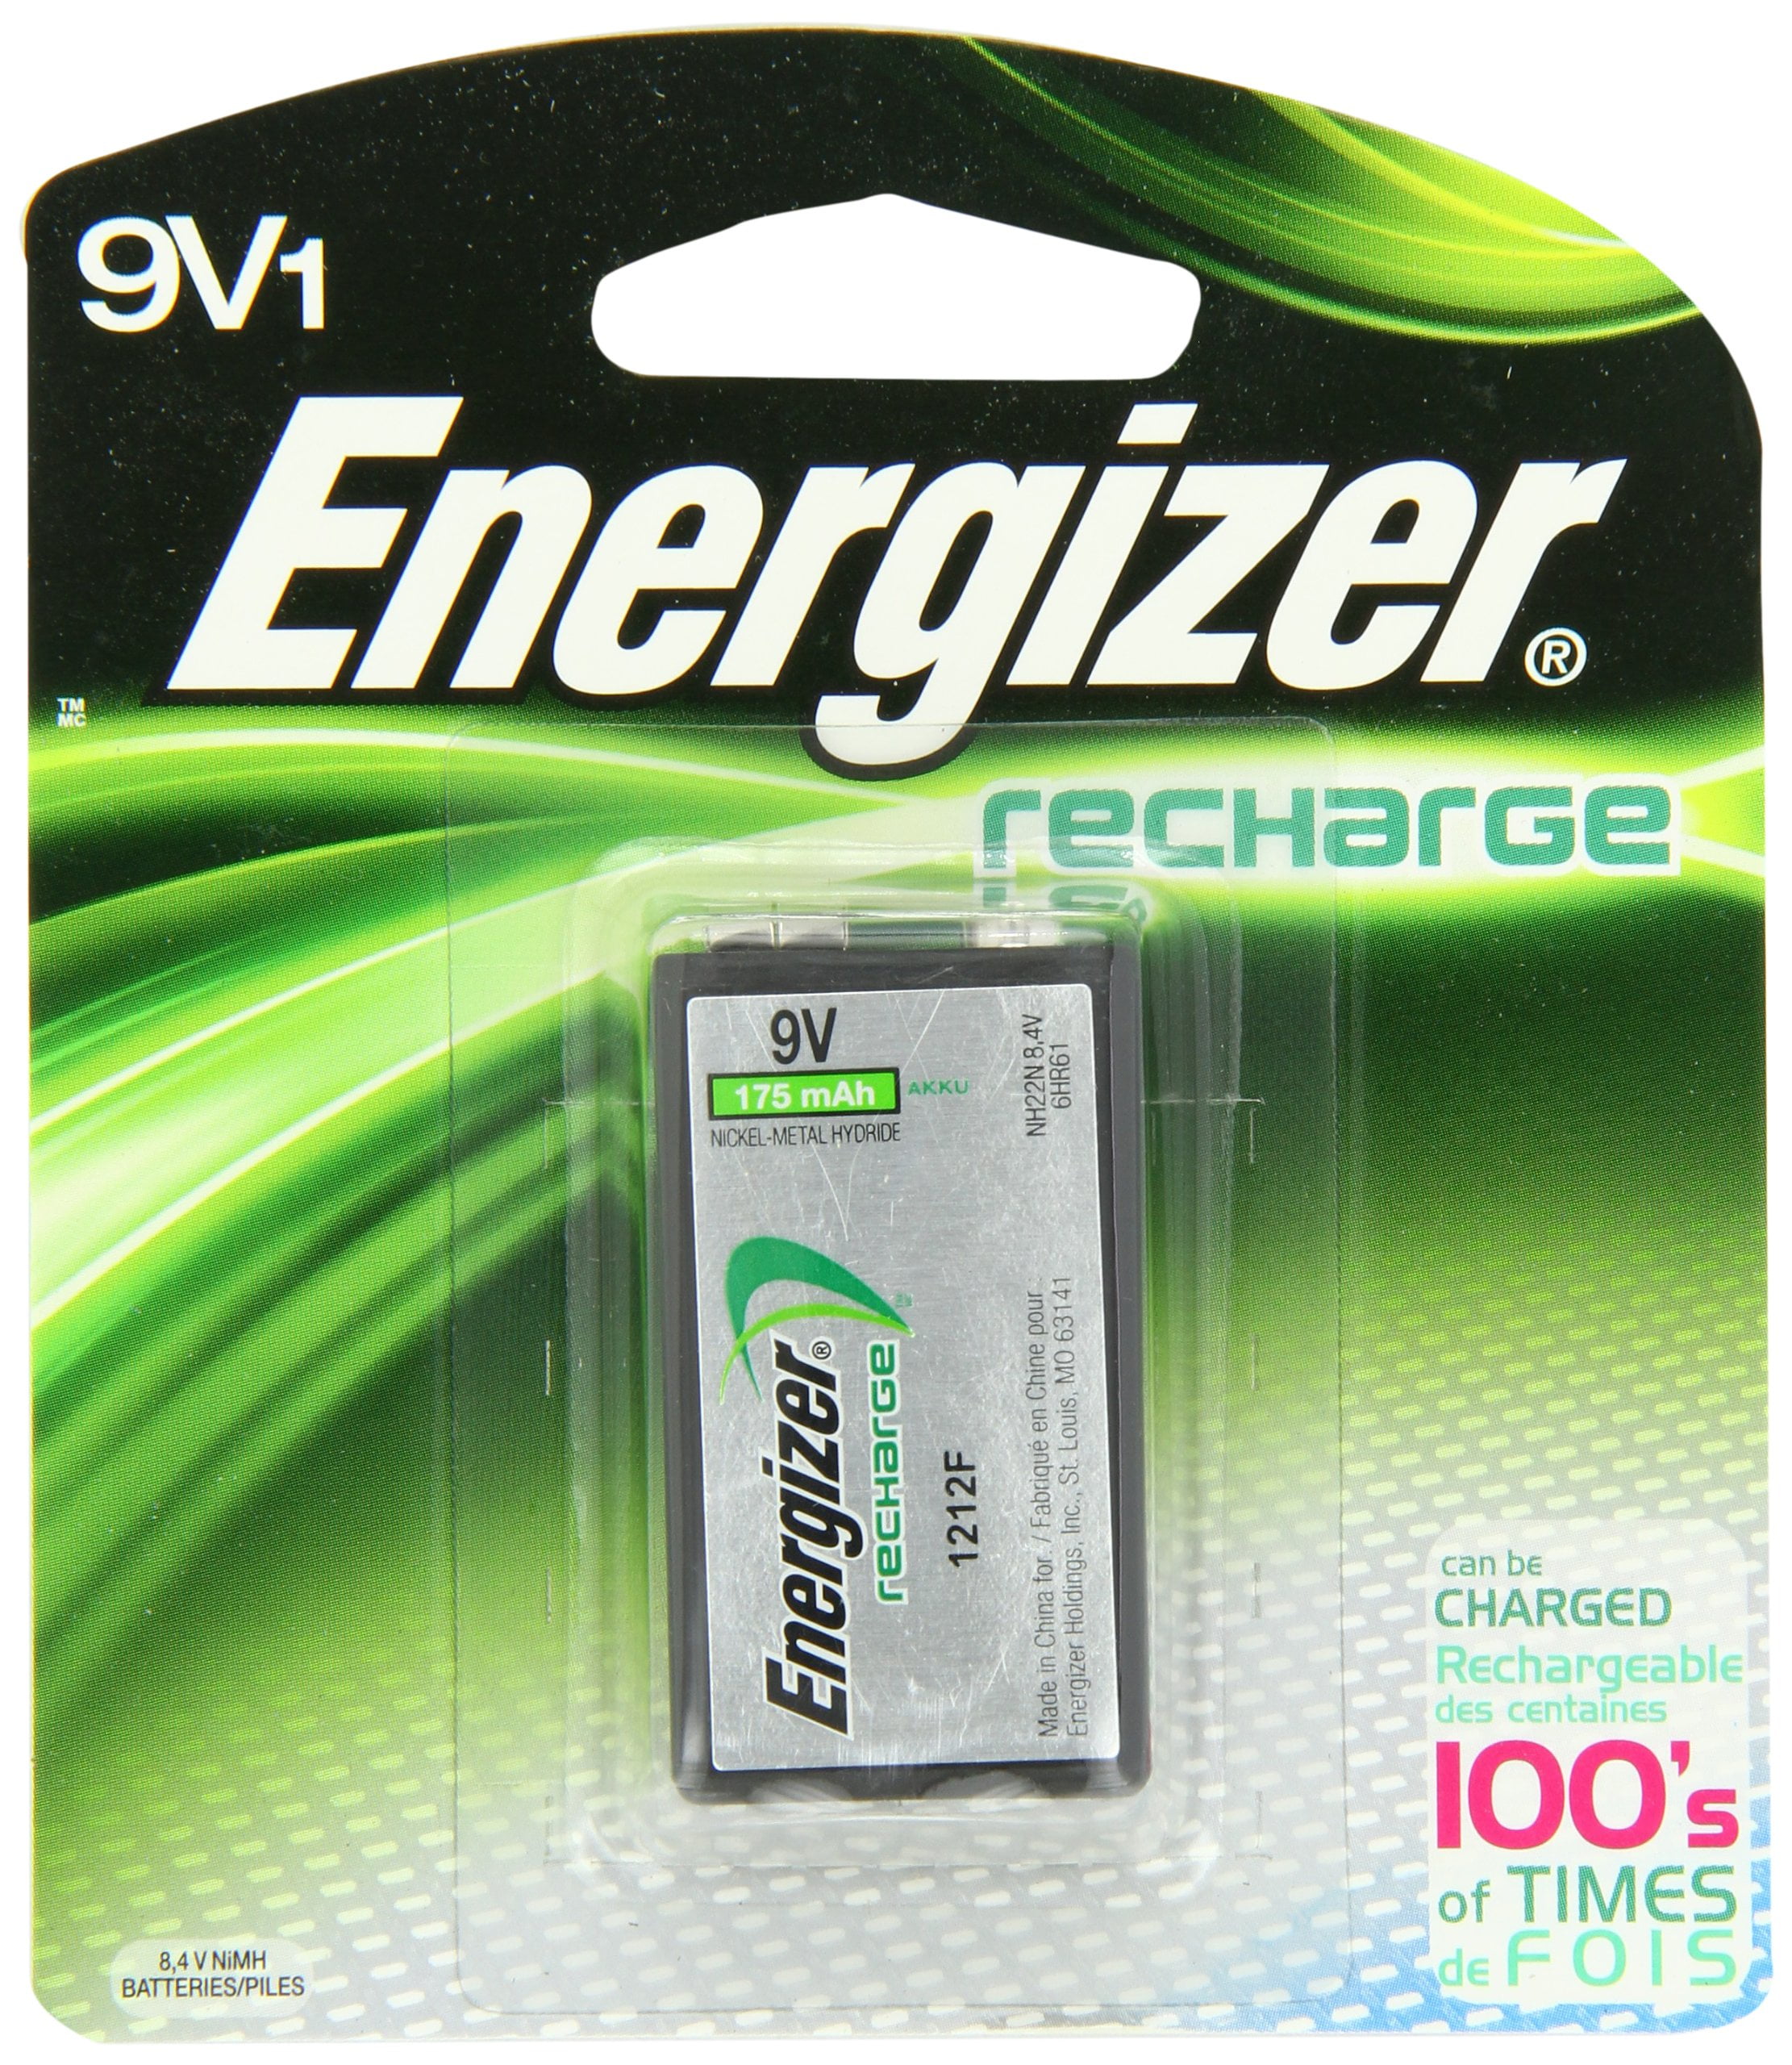 Volts battery цена. Energizer 9v 175 МАЧ 1шт.. Energizer 2 amp Battery Charger.